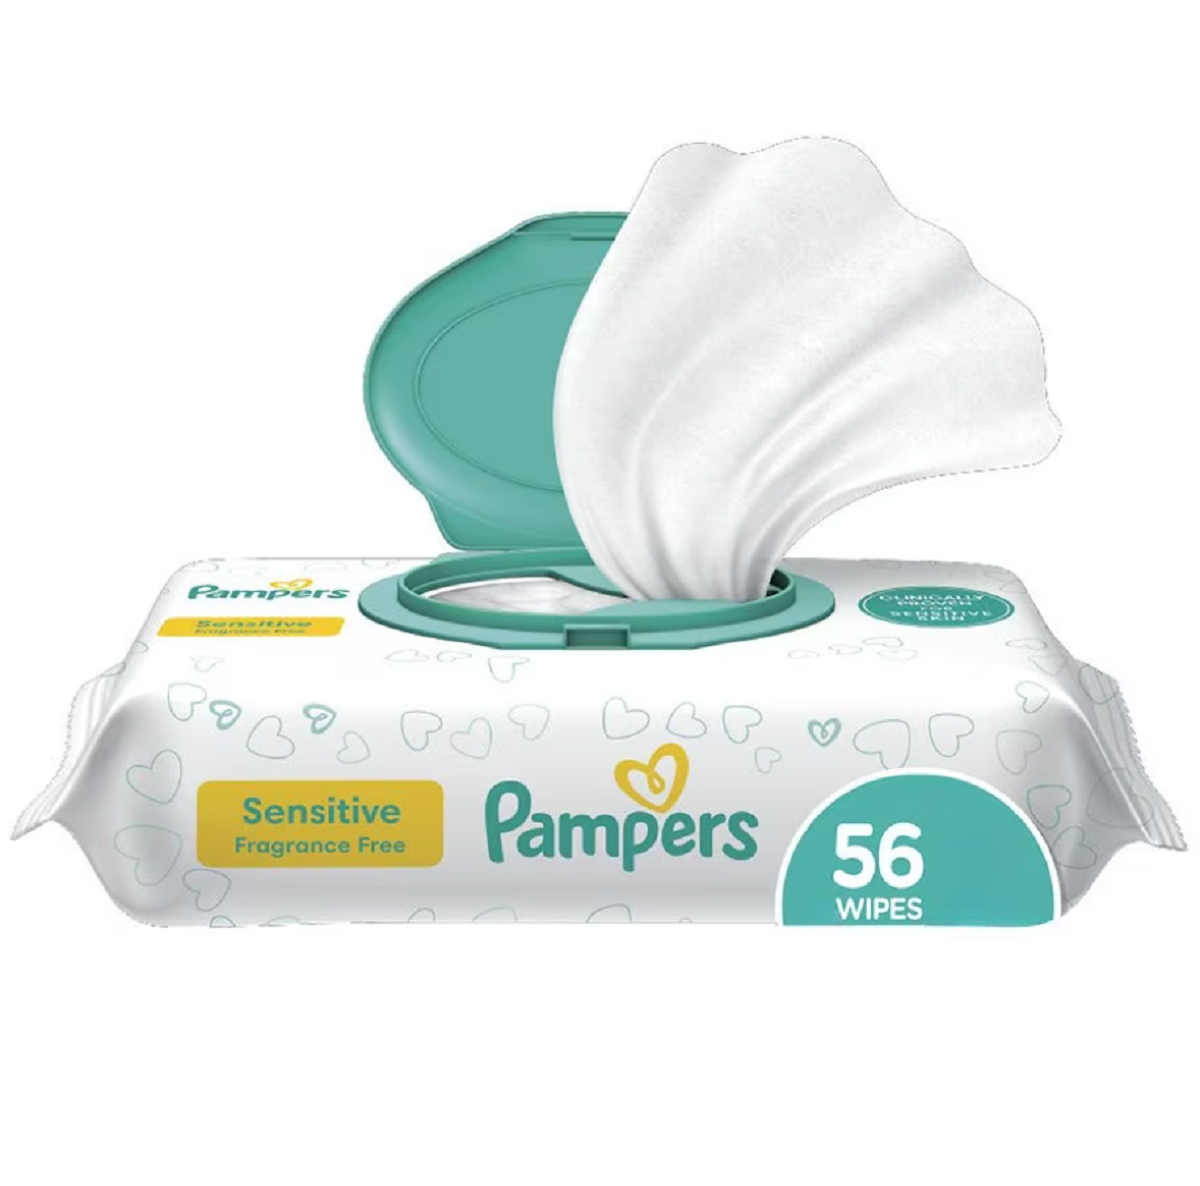 Buy 2 Pampers Single-Pack Baby Wipes & Get $1.50 Off with my Walgreens